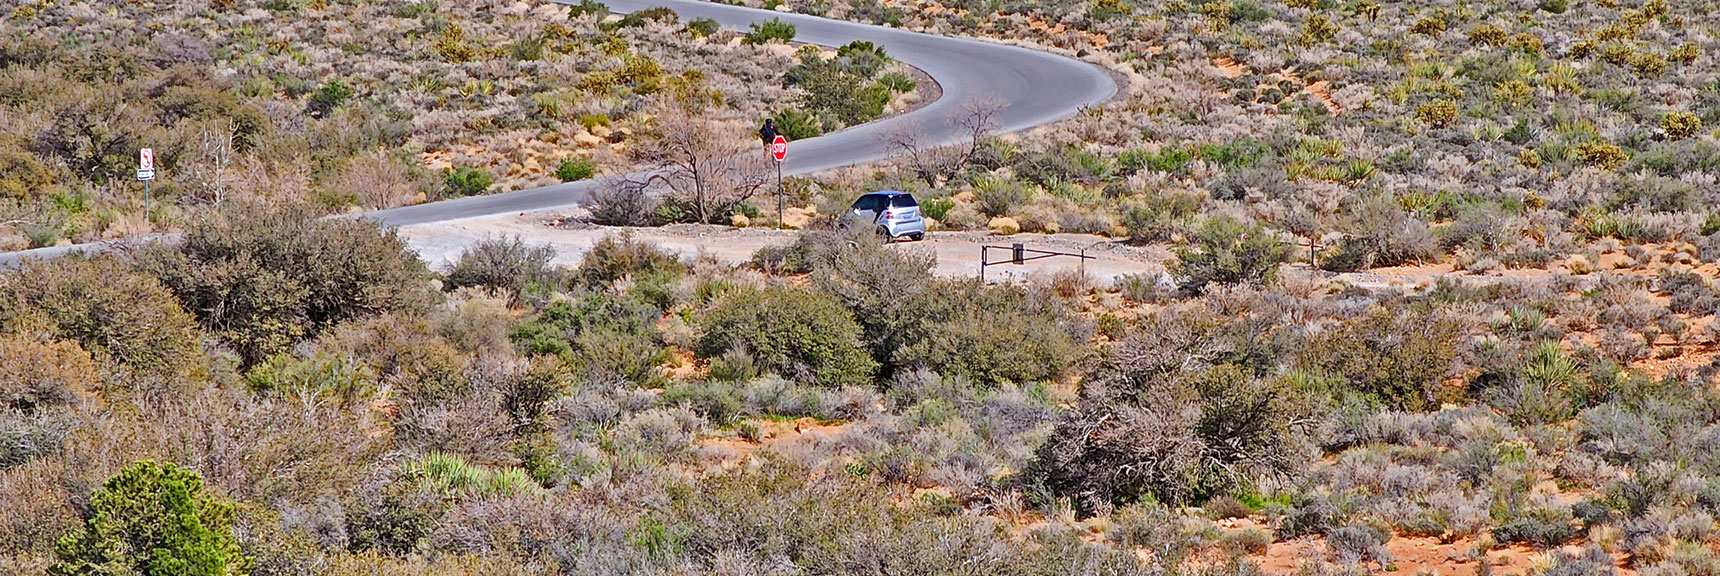 Standing on Lower Edge of Road. We're This Close to Oak Creek Rd/Scenic Drive Intersection | Historic Roads in Red Rock Canyon, Nevada | David Smith | LasVegasAreaTrails.com